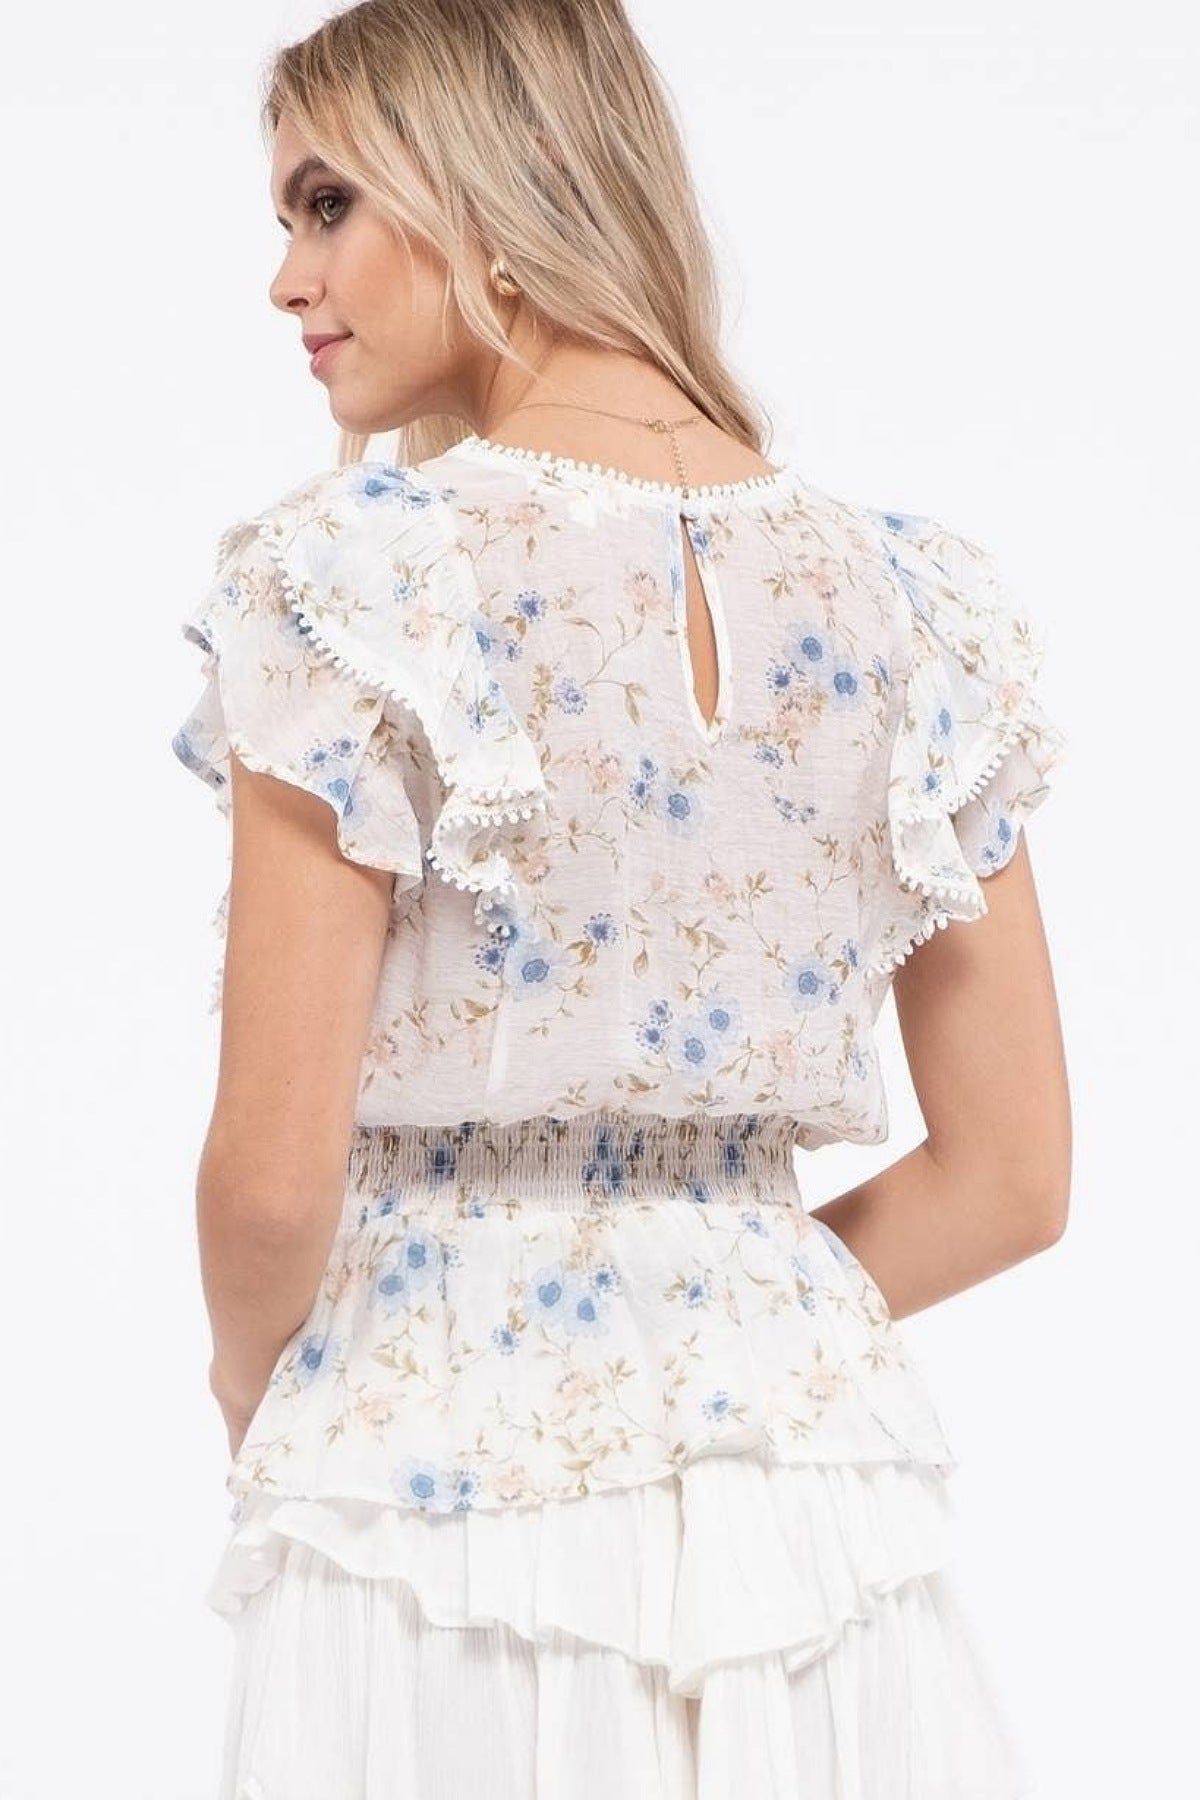 Belle Empire Waist Floral Top in Ivory